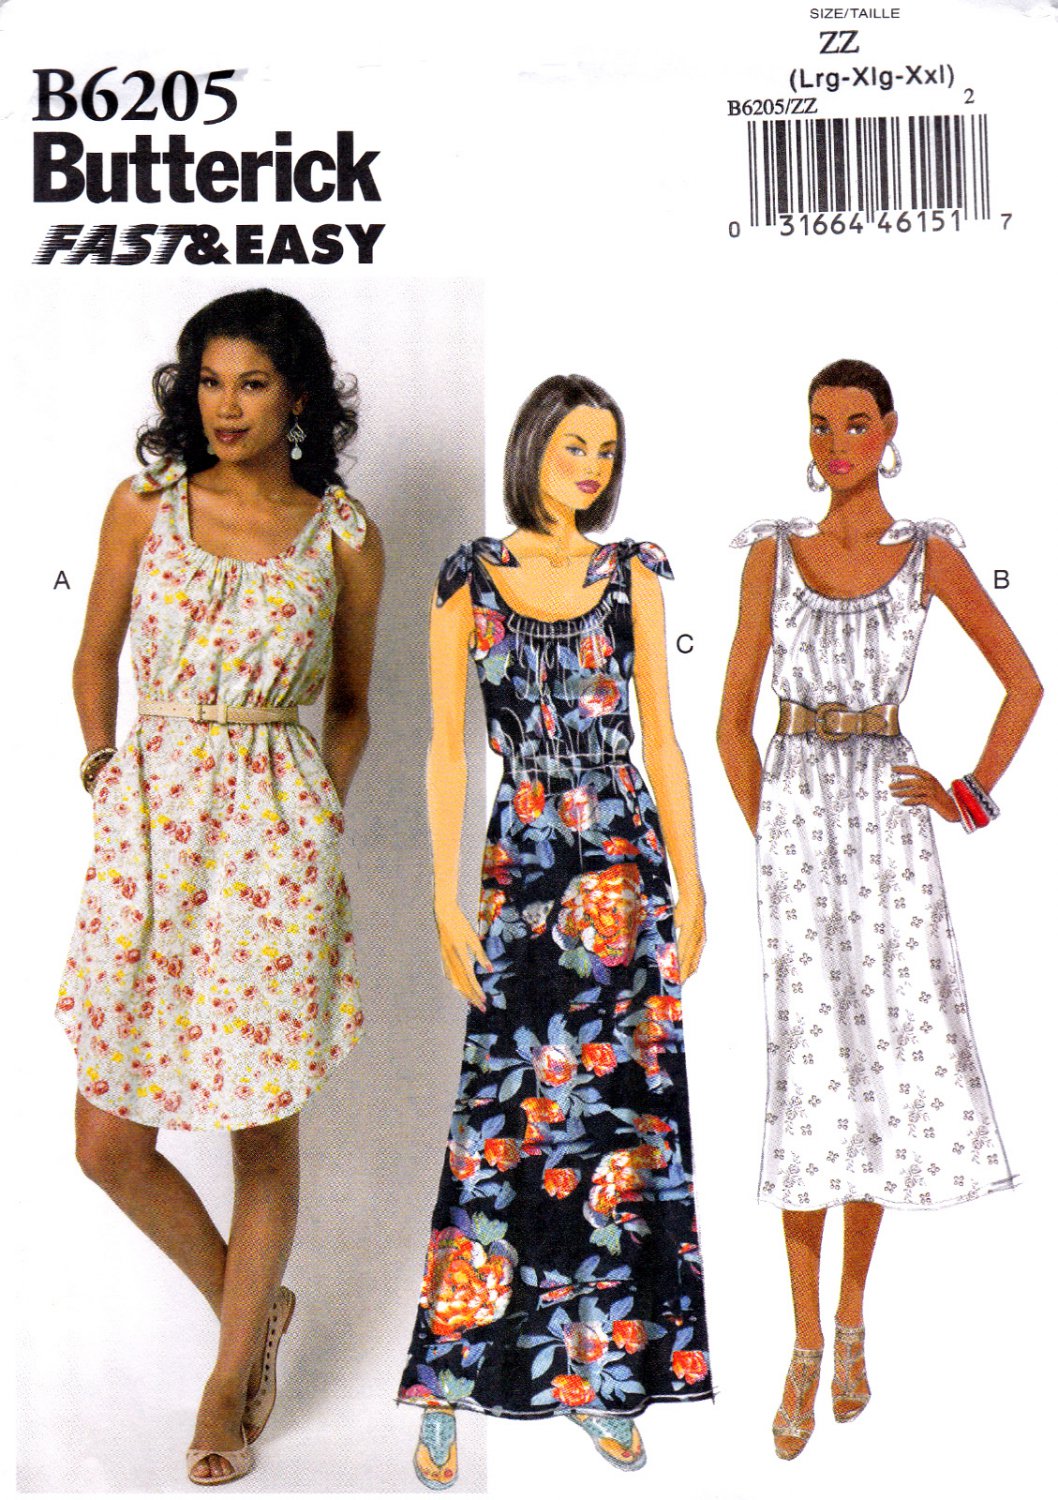 Butterick B6205 6205 Womens Misses Dresses Pullover Easy Sewing Pattern Sizes Lrg-Xlg-Xxl